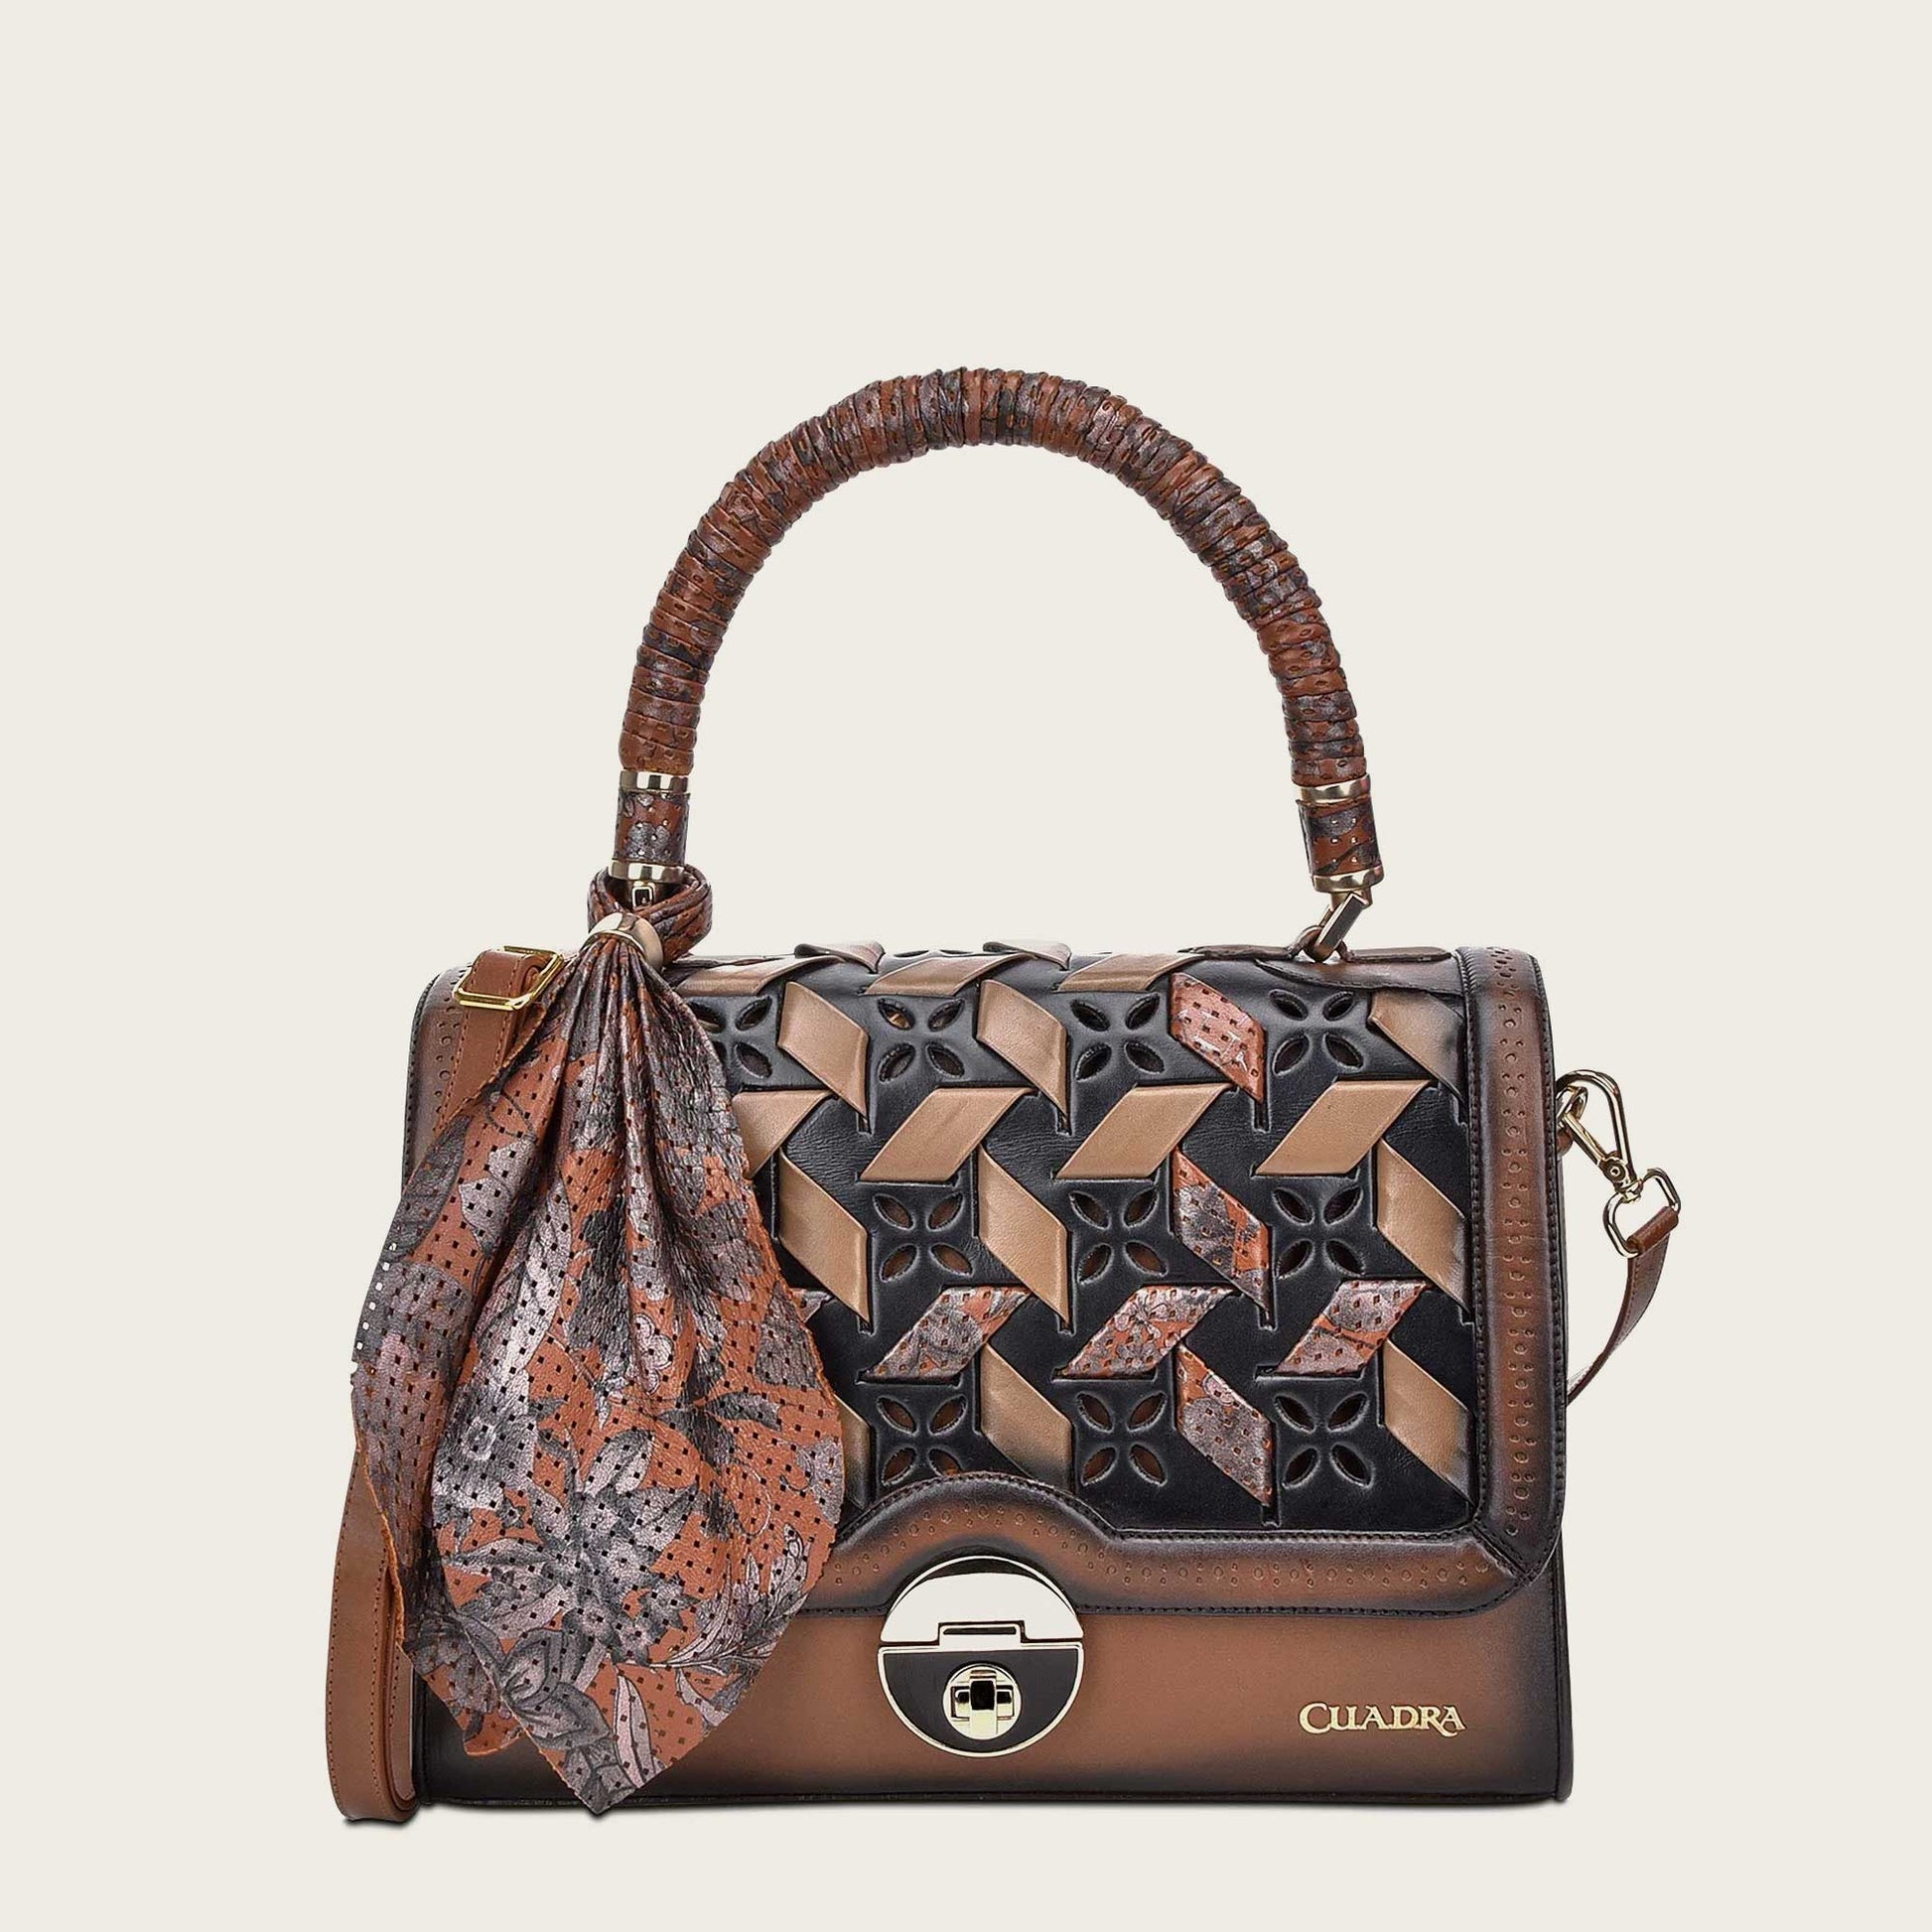 Printed brown leather satchel bag, for women in bovine leather. Perforated with organic motifs, with bovine leather and an ovine leather bandana.